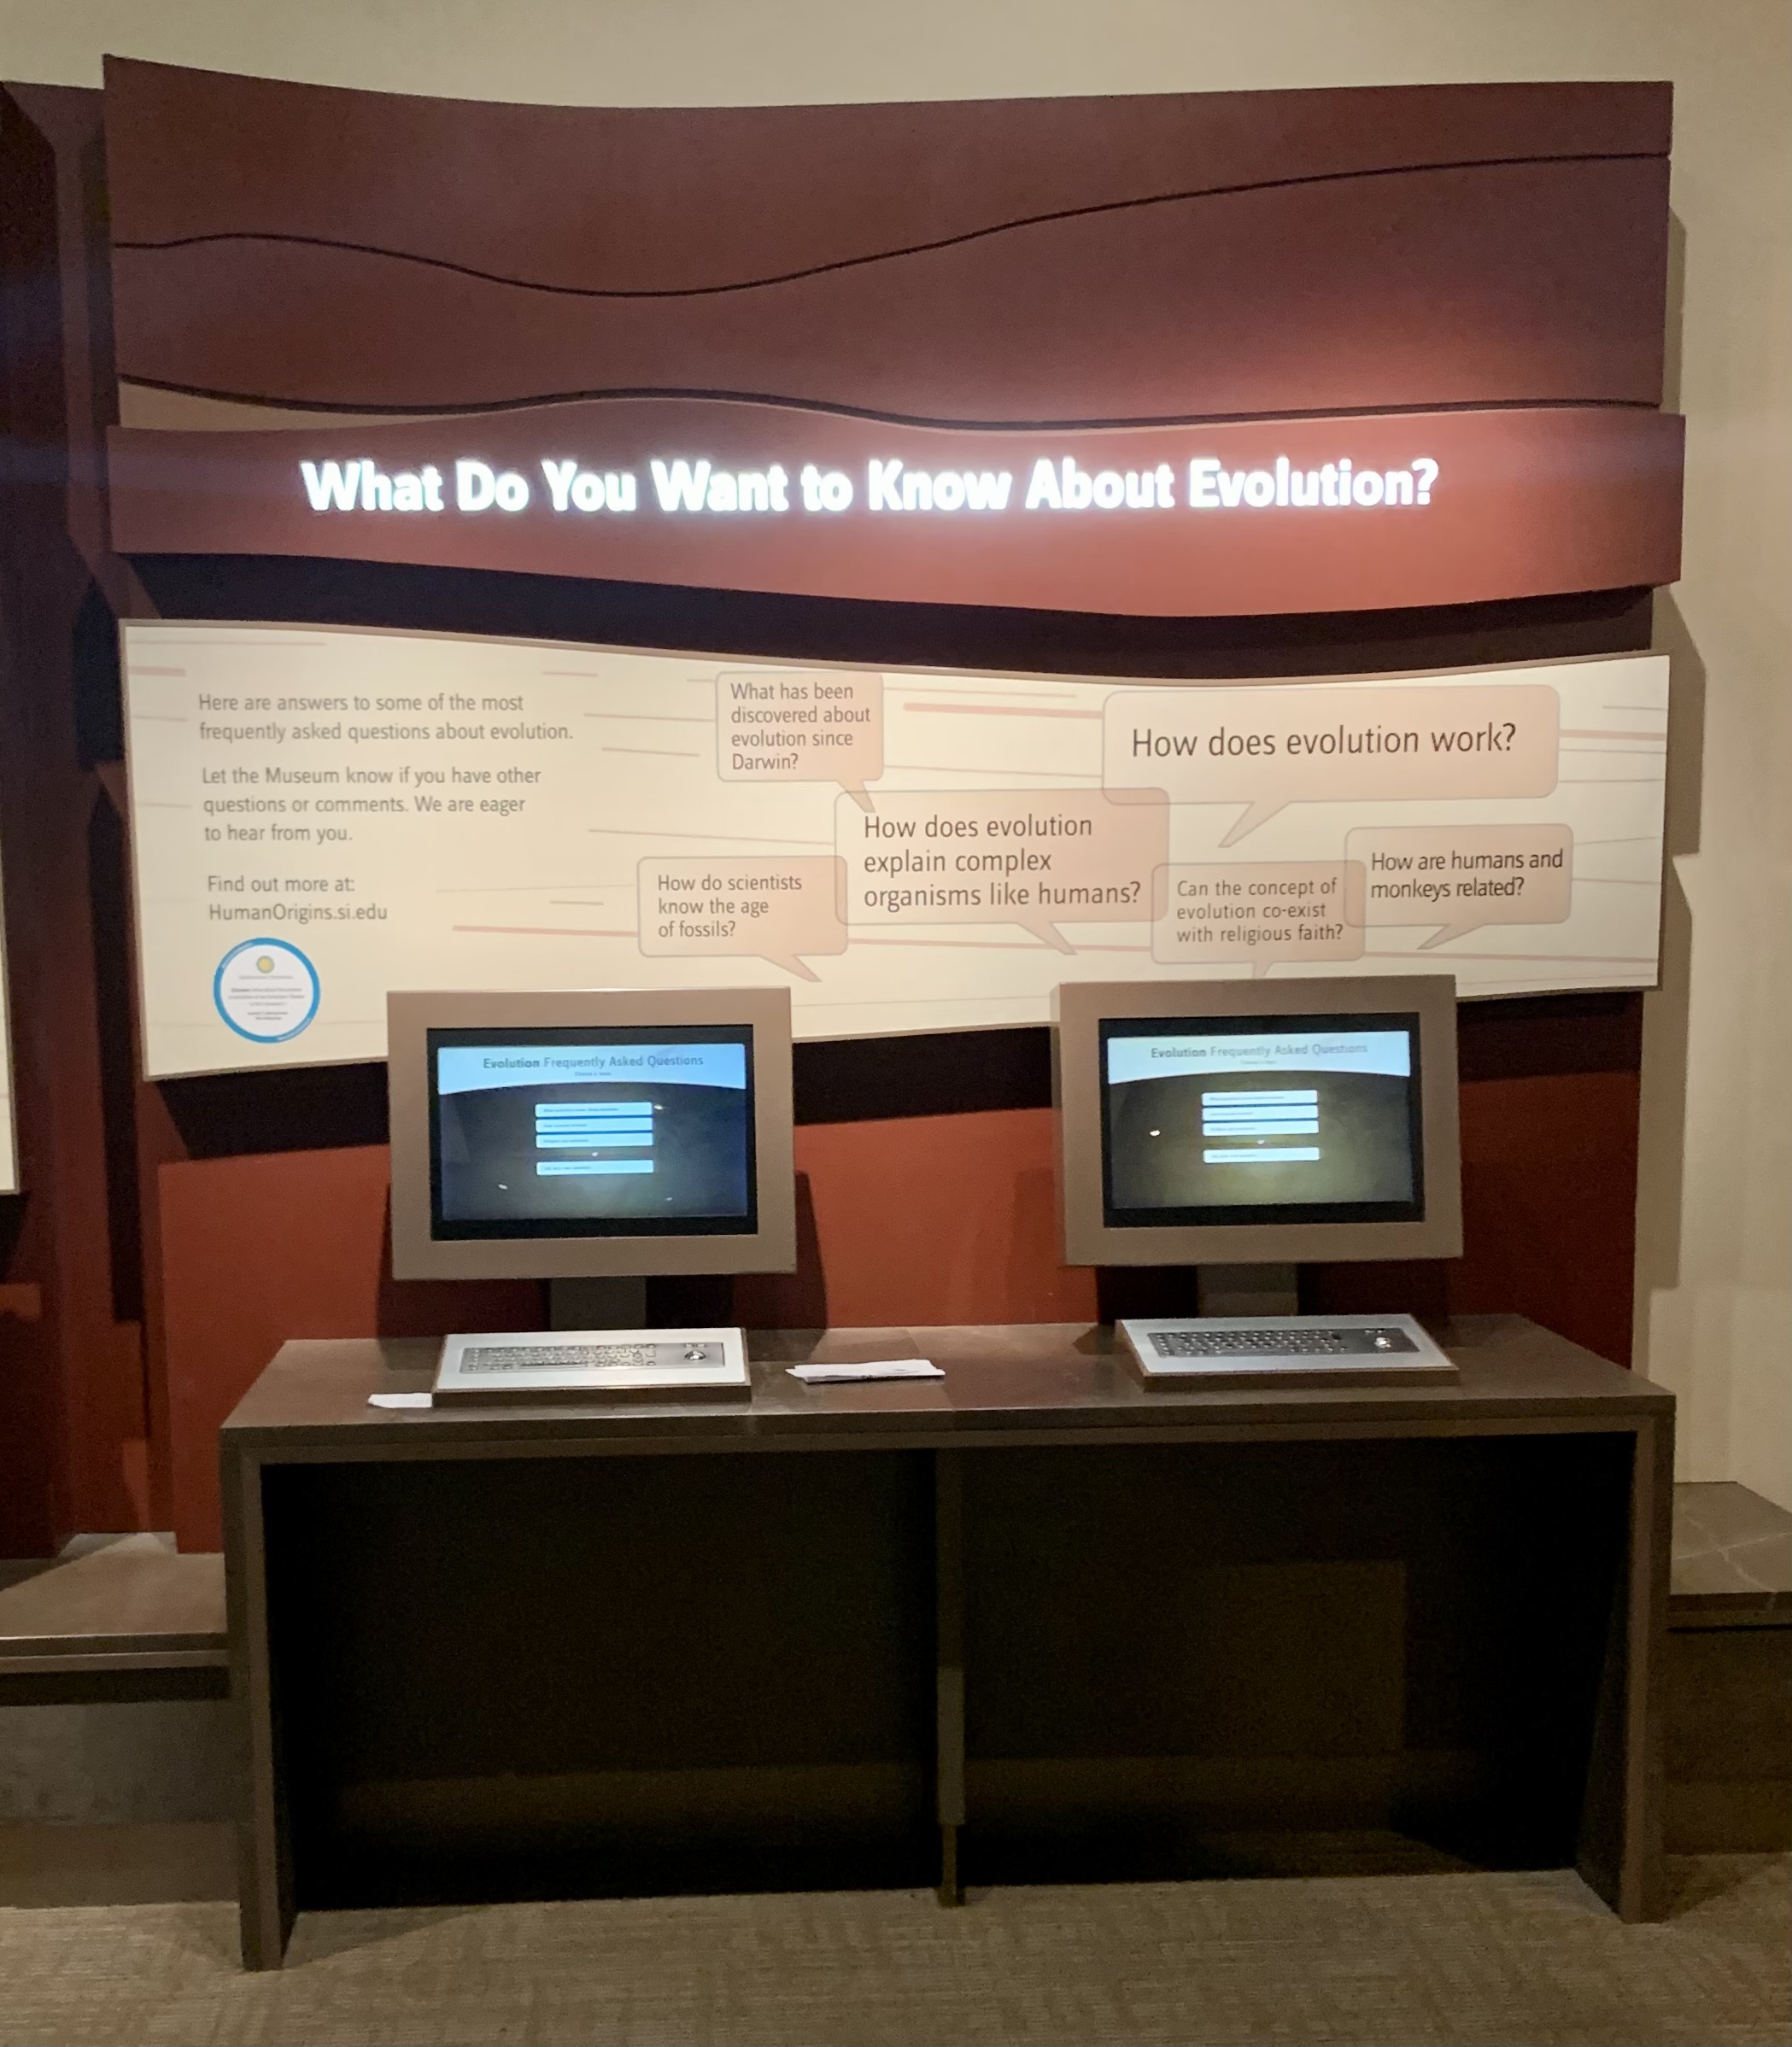 Photo shows a zoomed out view of the Evolution FAQ computers and the question above the computers reads: what do you want to know about evolution?